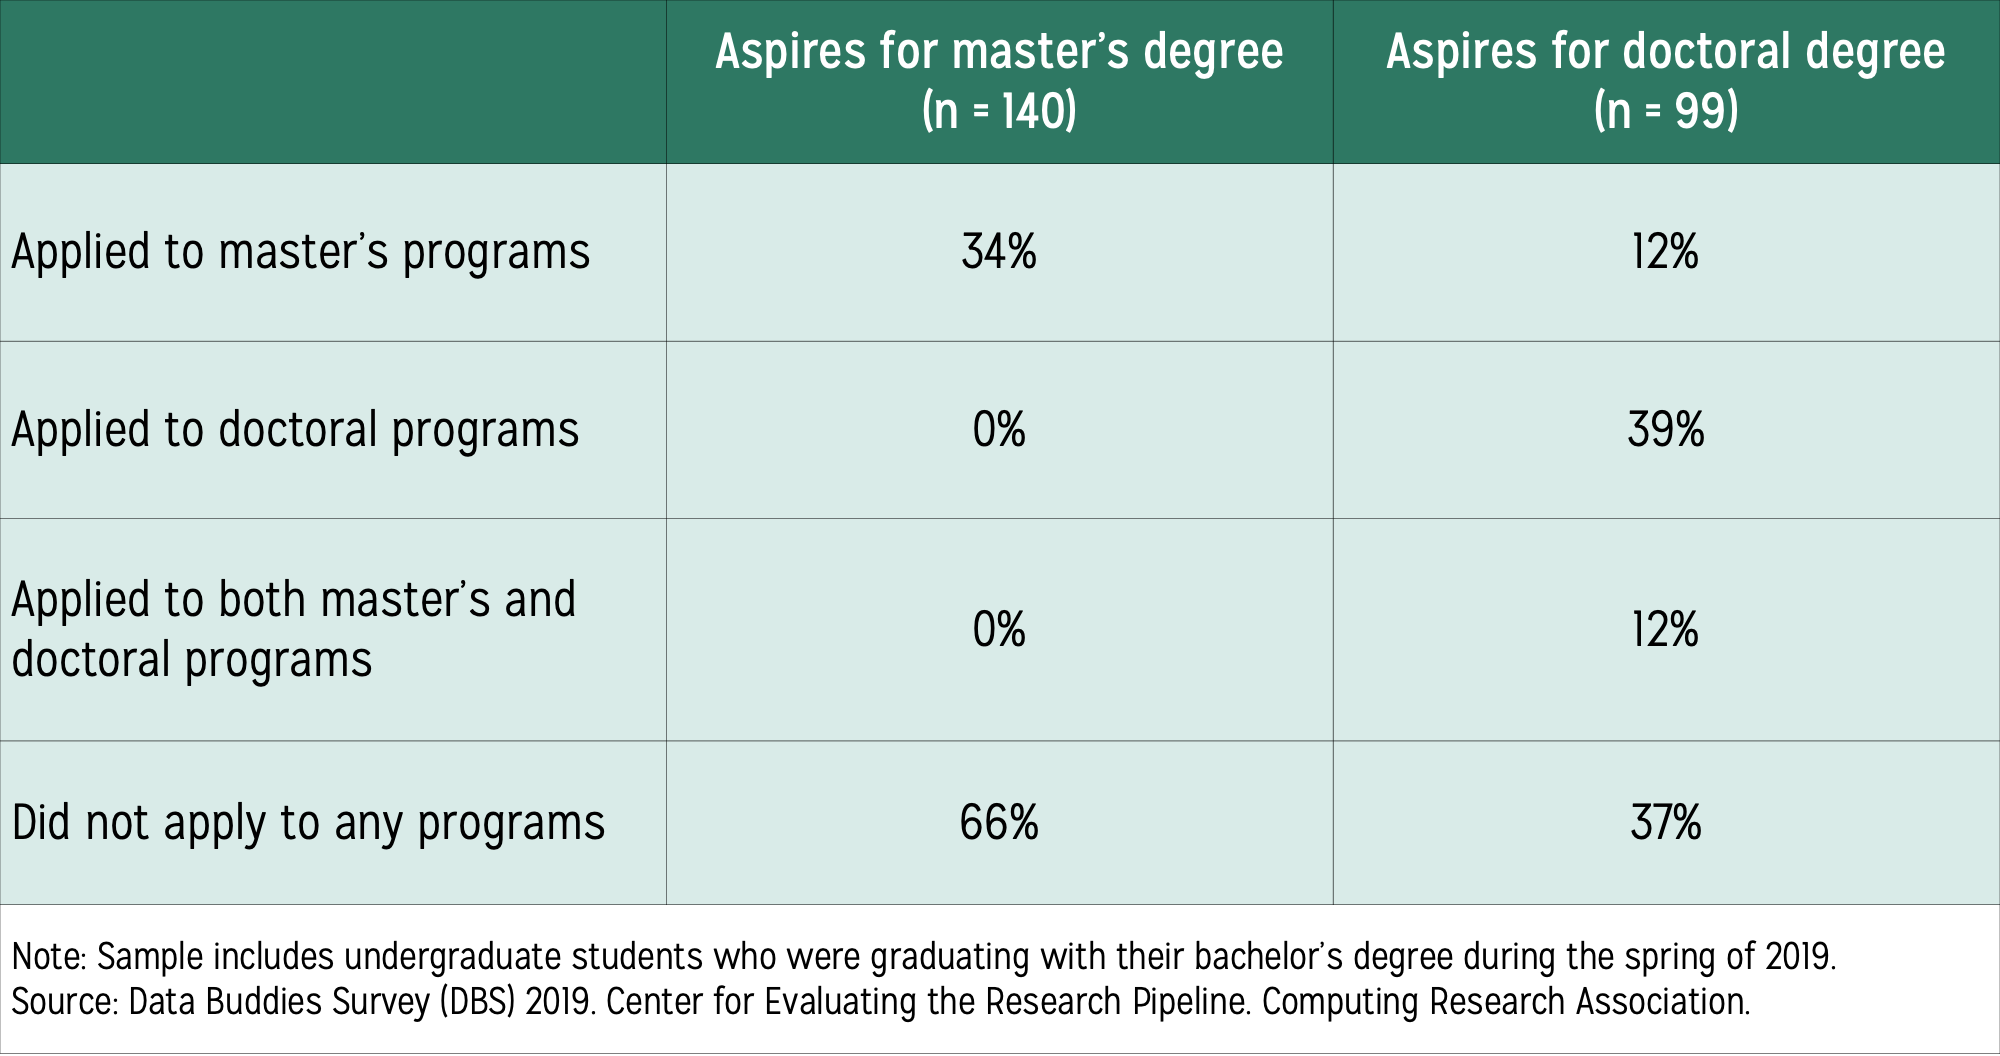 Table displaying information on graduate school applications by students’ highest degree aspirations as either master’s or doctoral